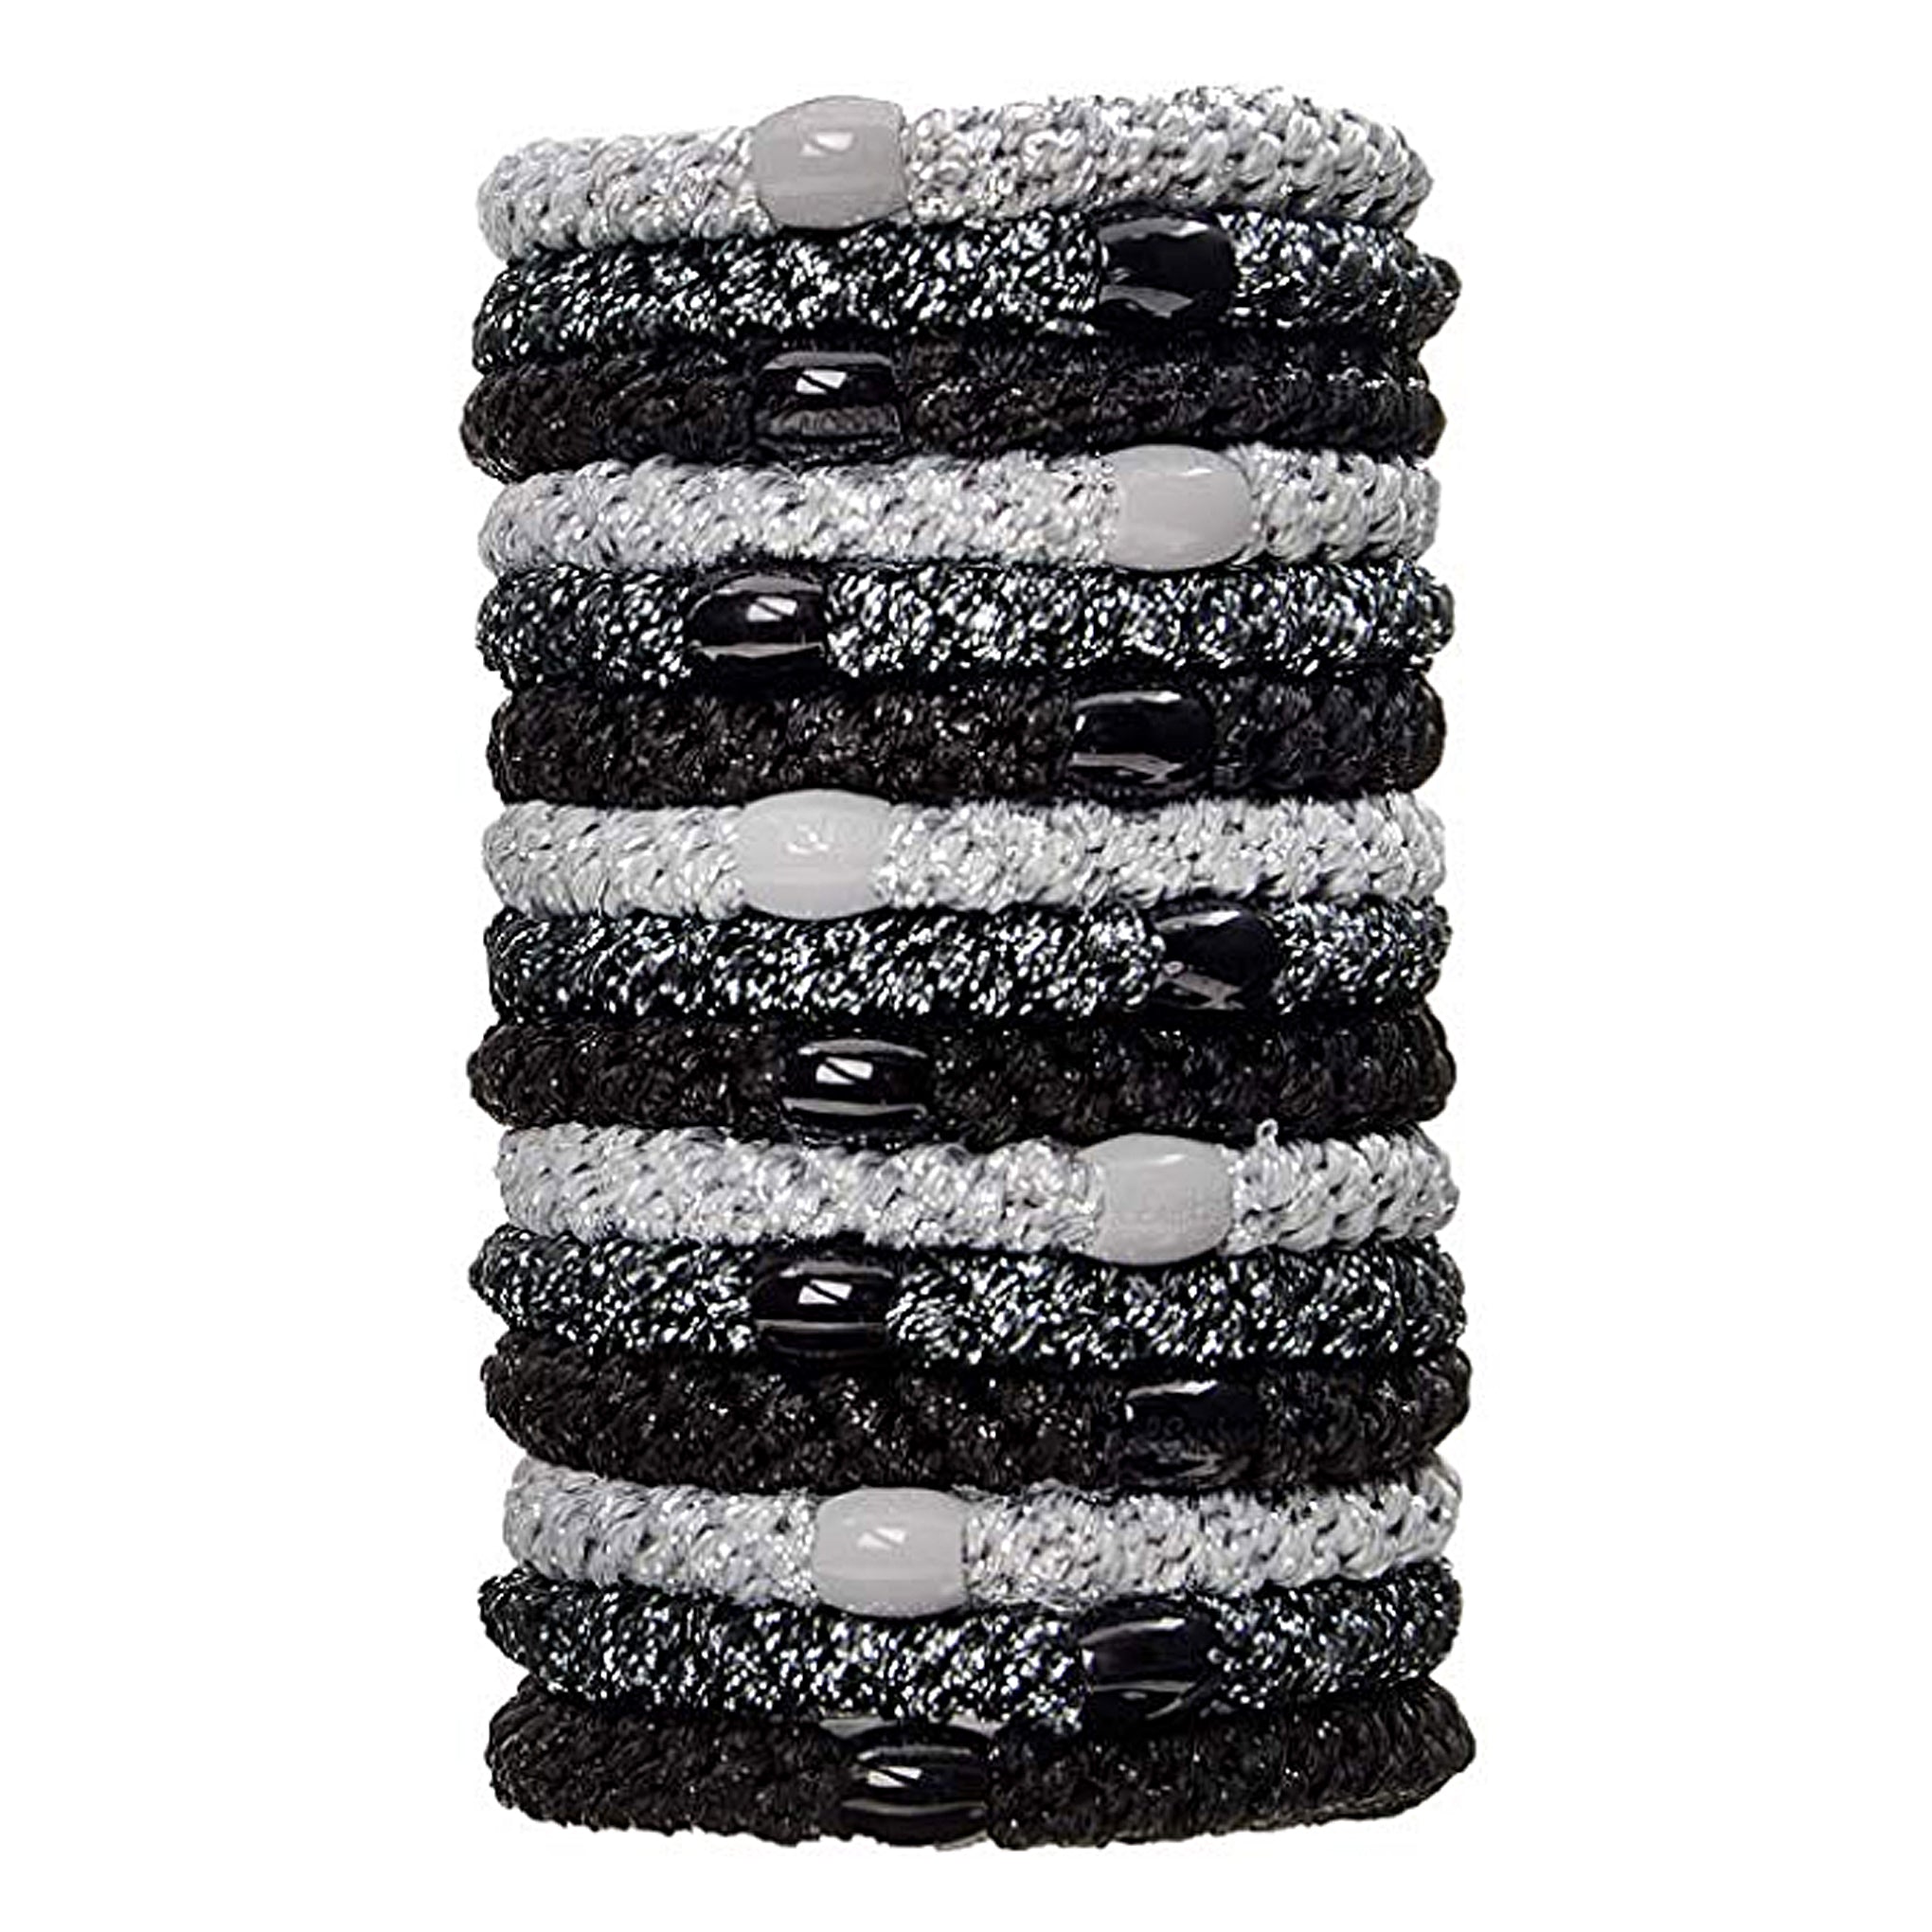 image of stacked L. Erickson Grab and Go Pony Tube Hair Ties in Black Metallic 15 Pack